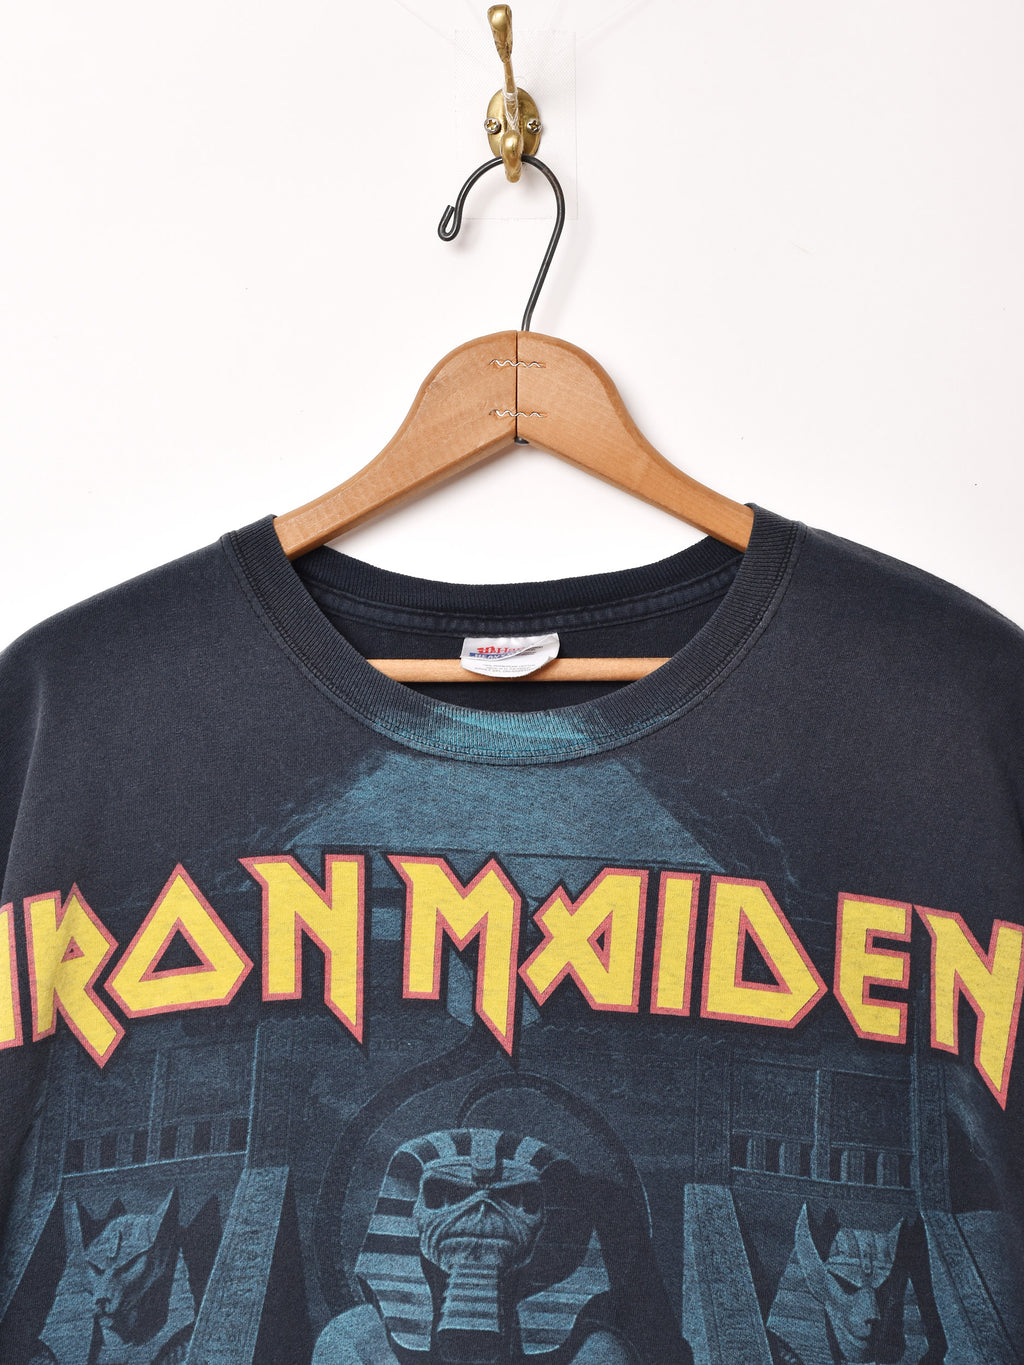 90s〜00s IRON MAIDEN バンドTシャツ – 古着屋Top of the Hillのネット 